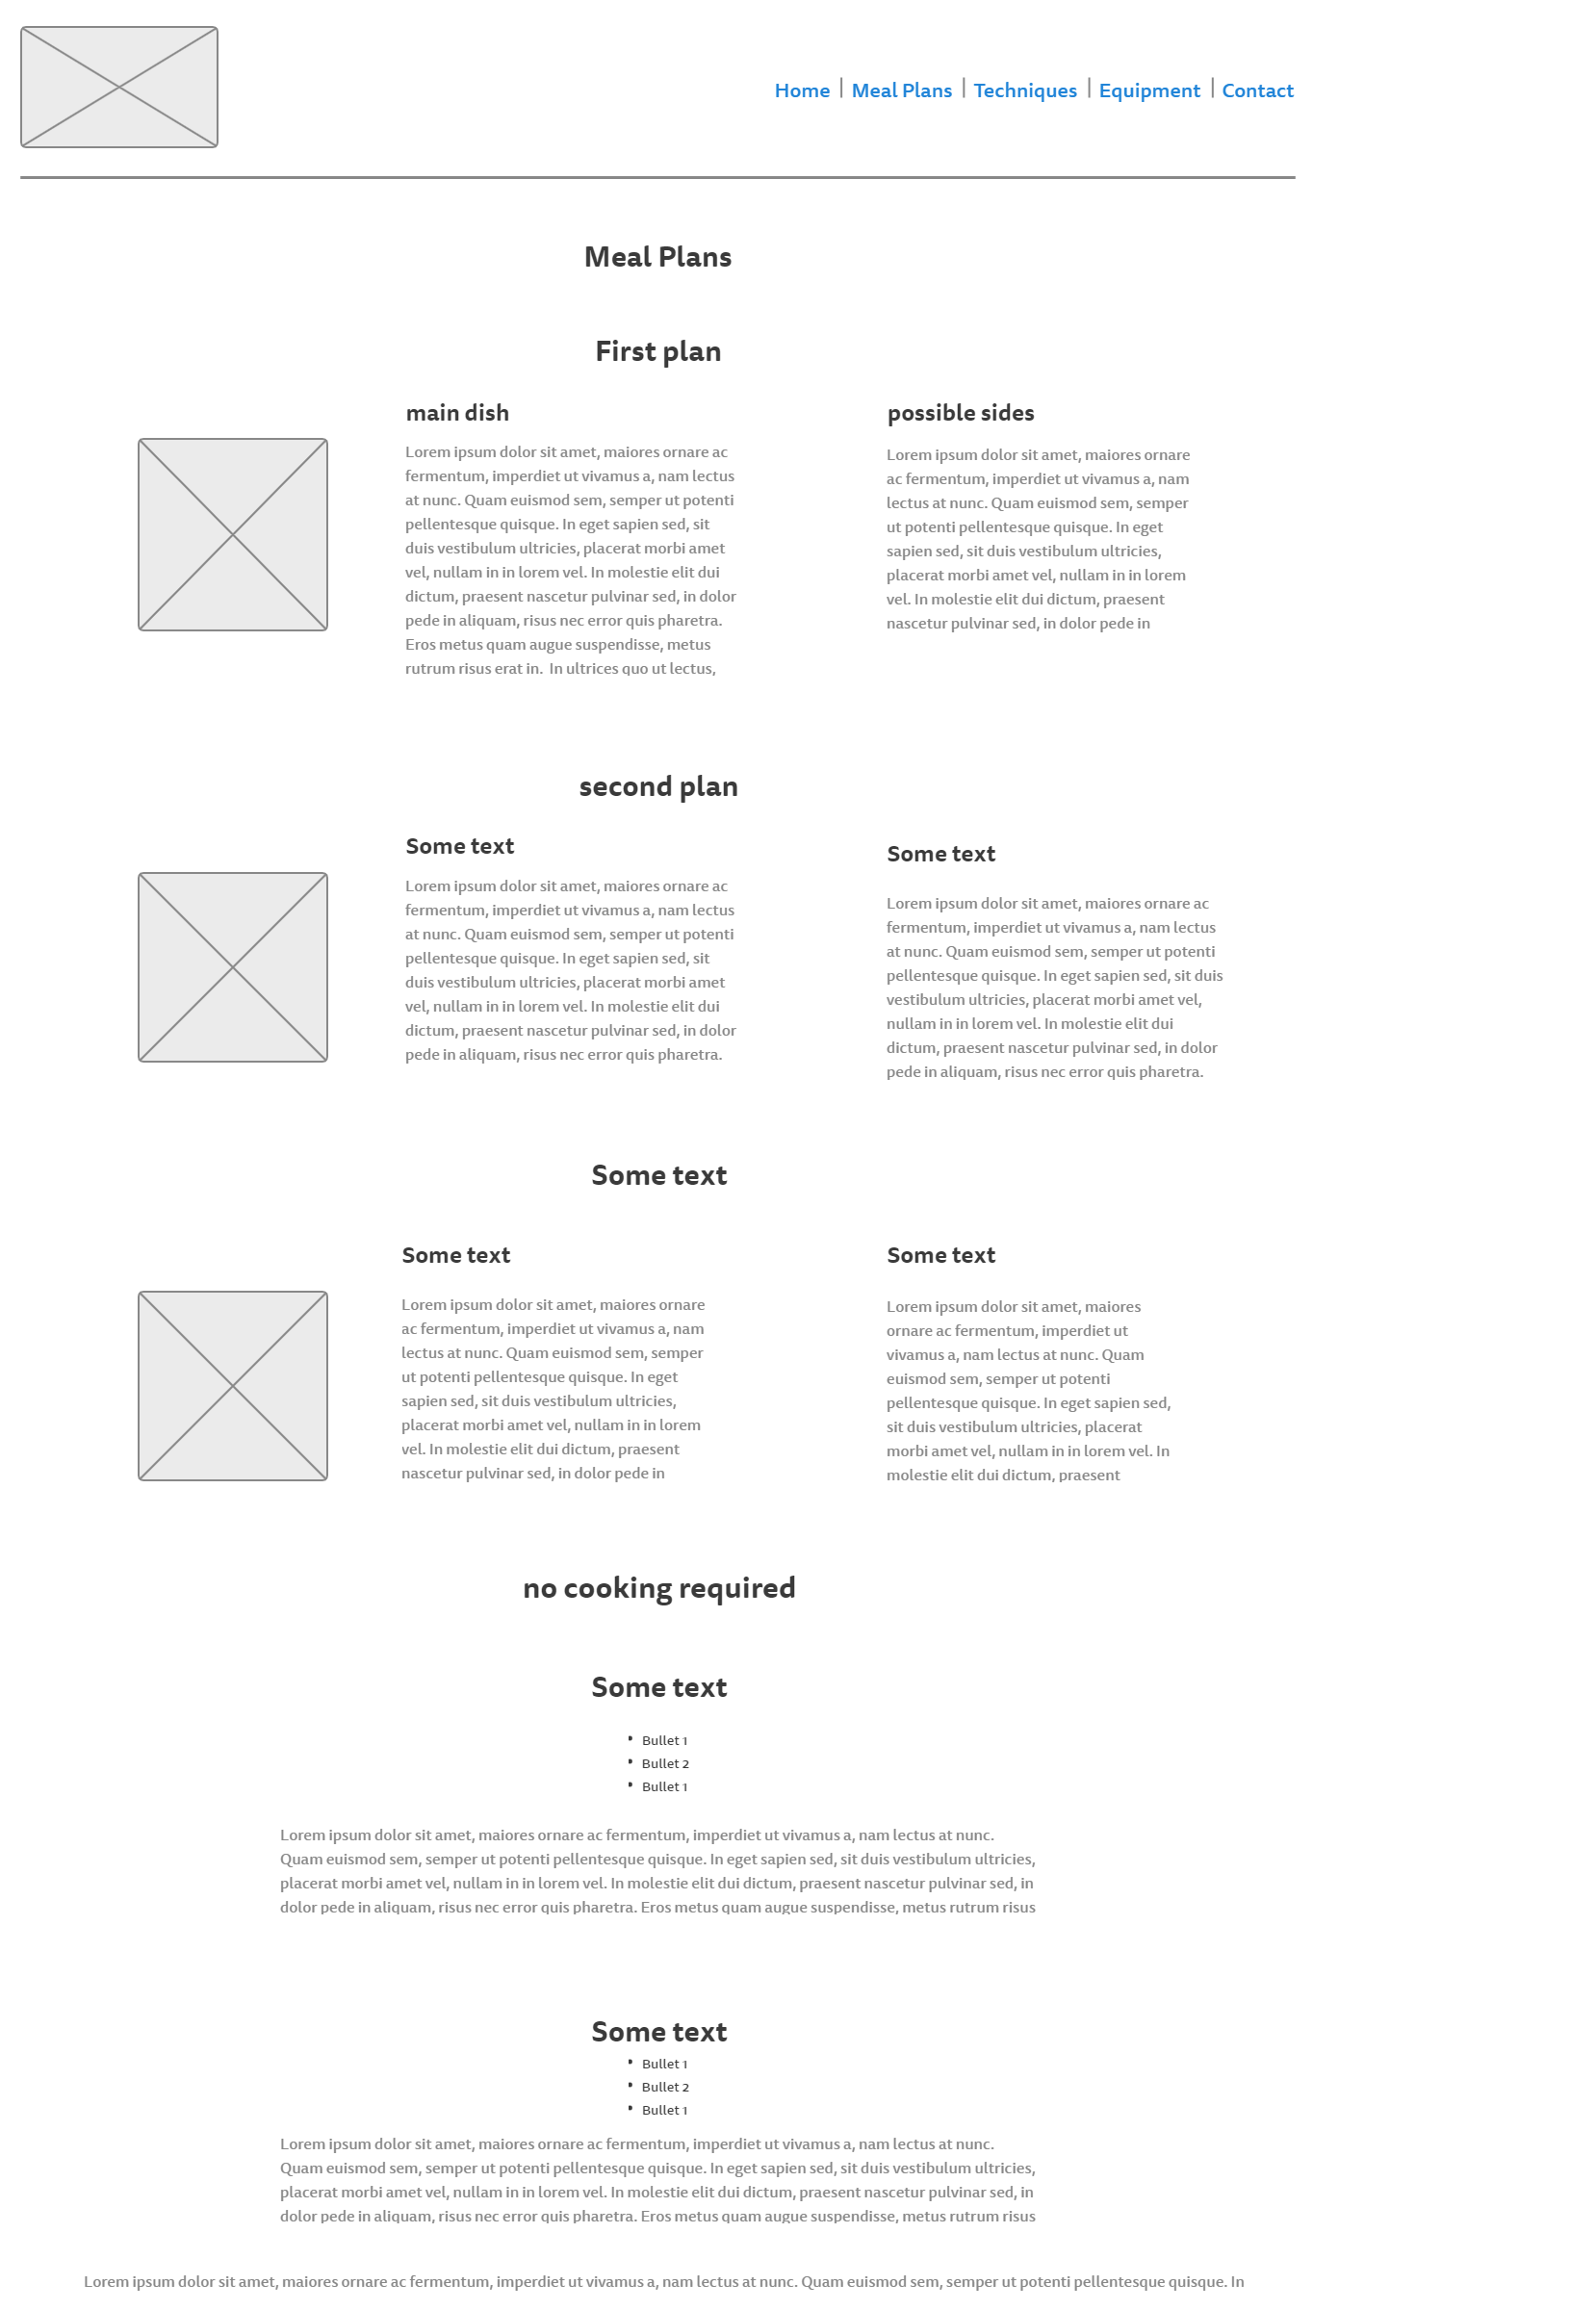 Meal plan wireframe